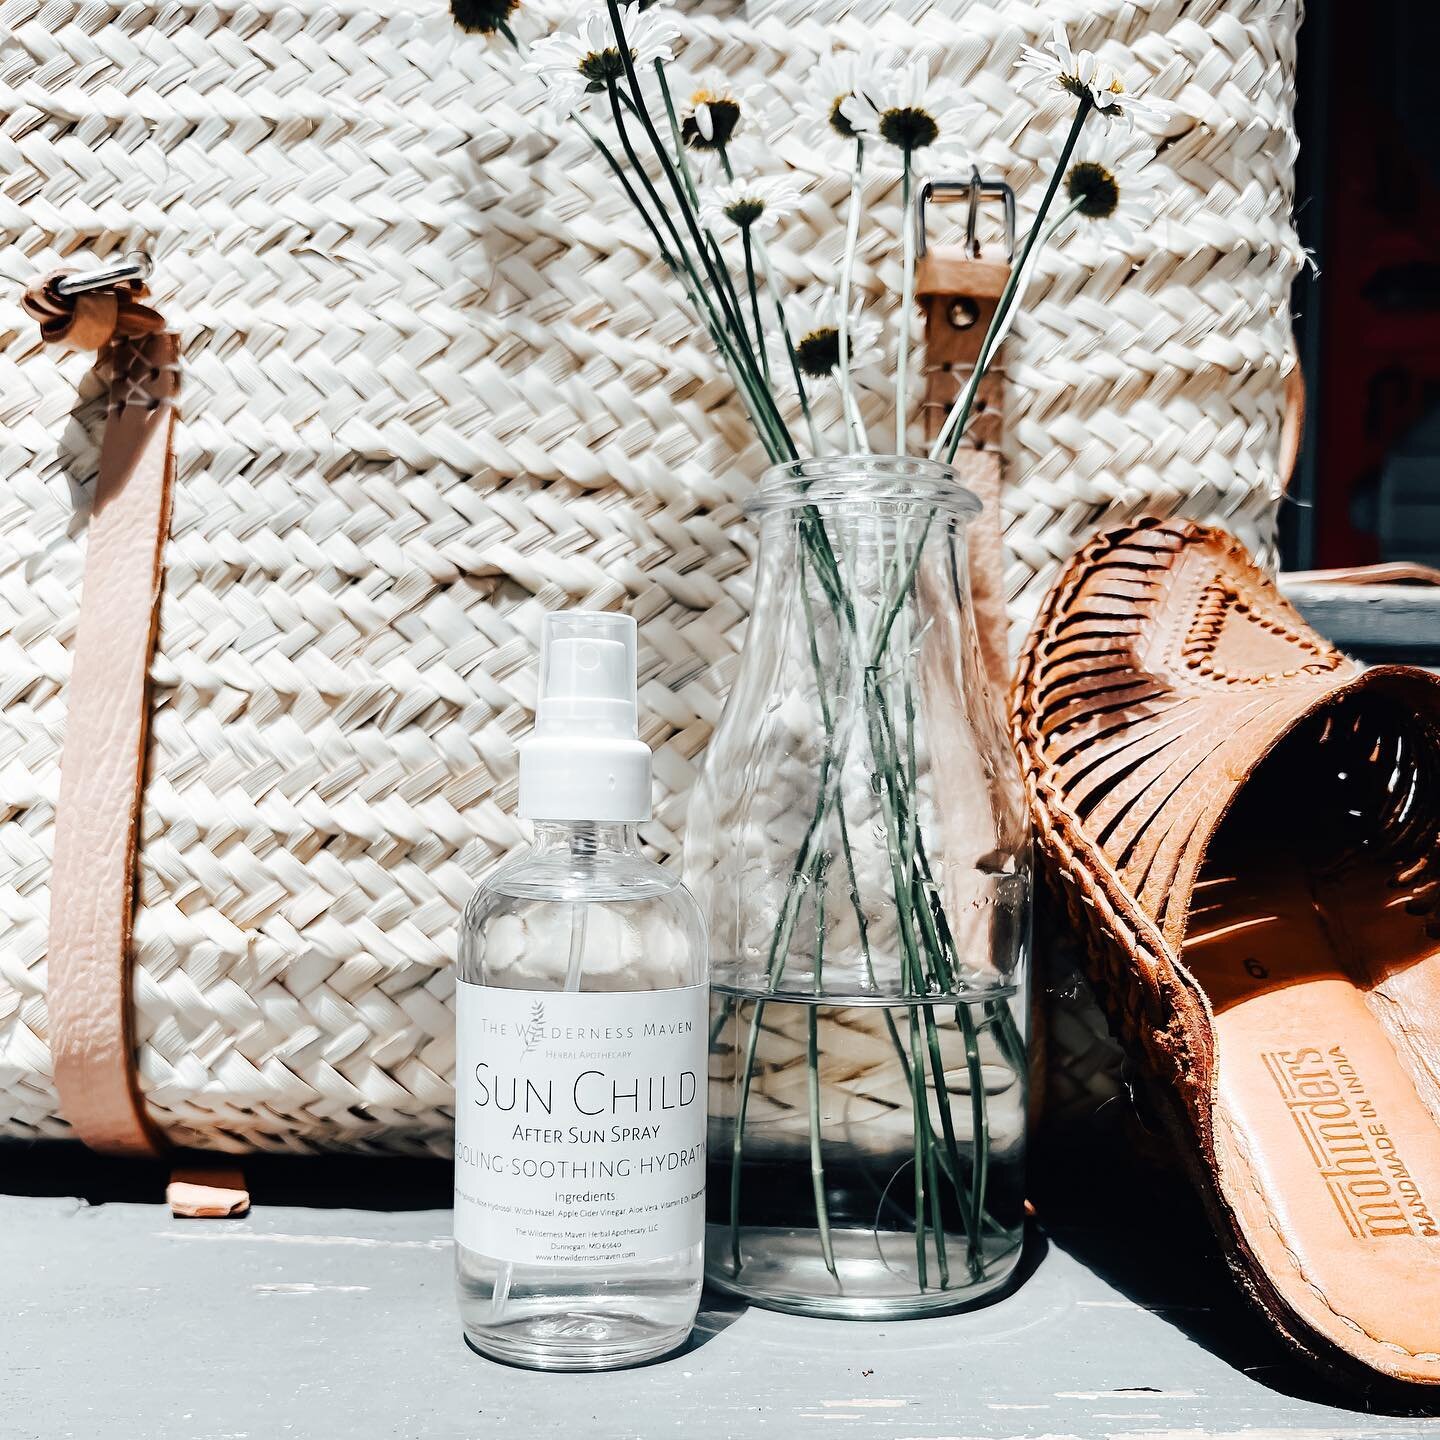 Summer is on its last legs but with Labor Day weekend coming up many people are getting ready for one last hurrah under the sun. Whether picnicking or chilling on the water, be prepared to give your skin some love after a day of sunshine! This beauty